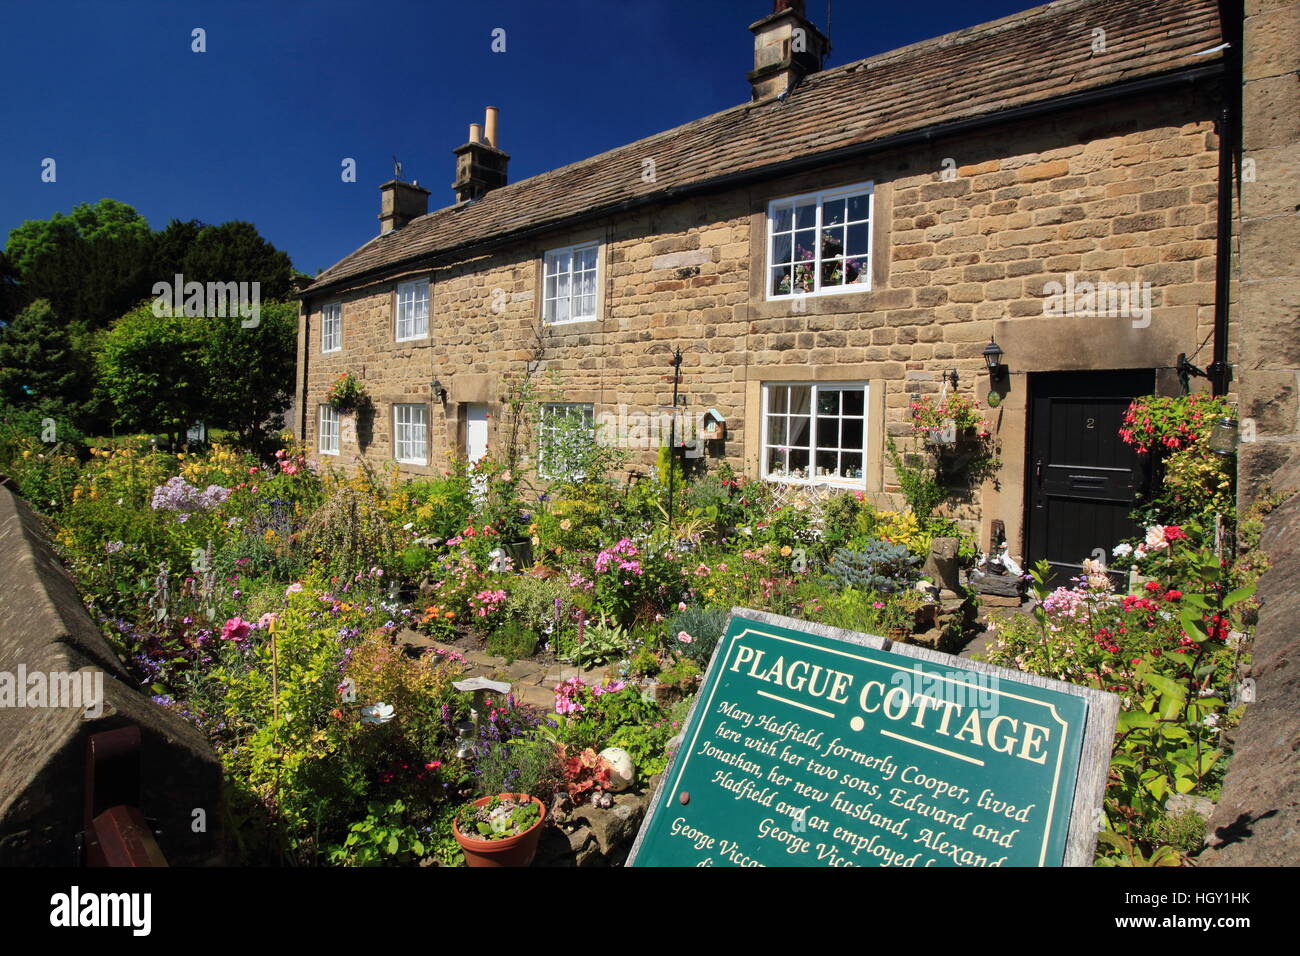 Historic Plague Cottages In Eyam Derbyshire So Called After